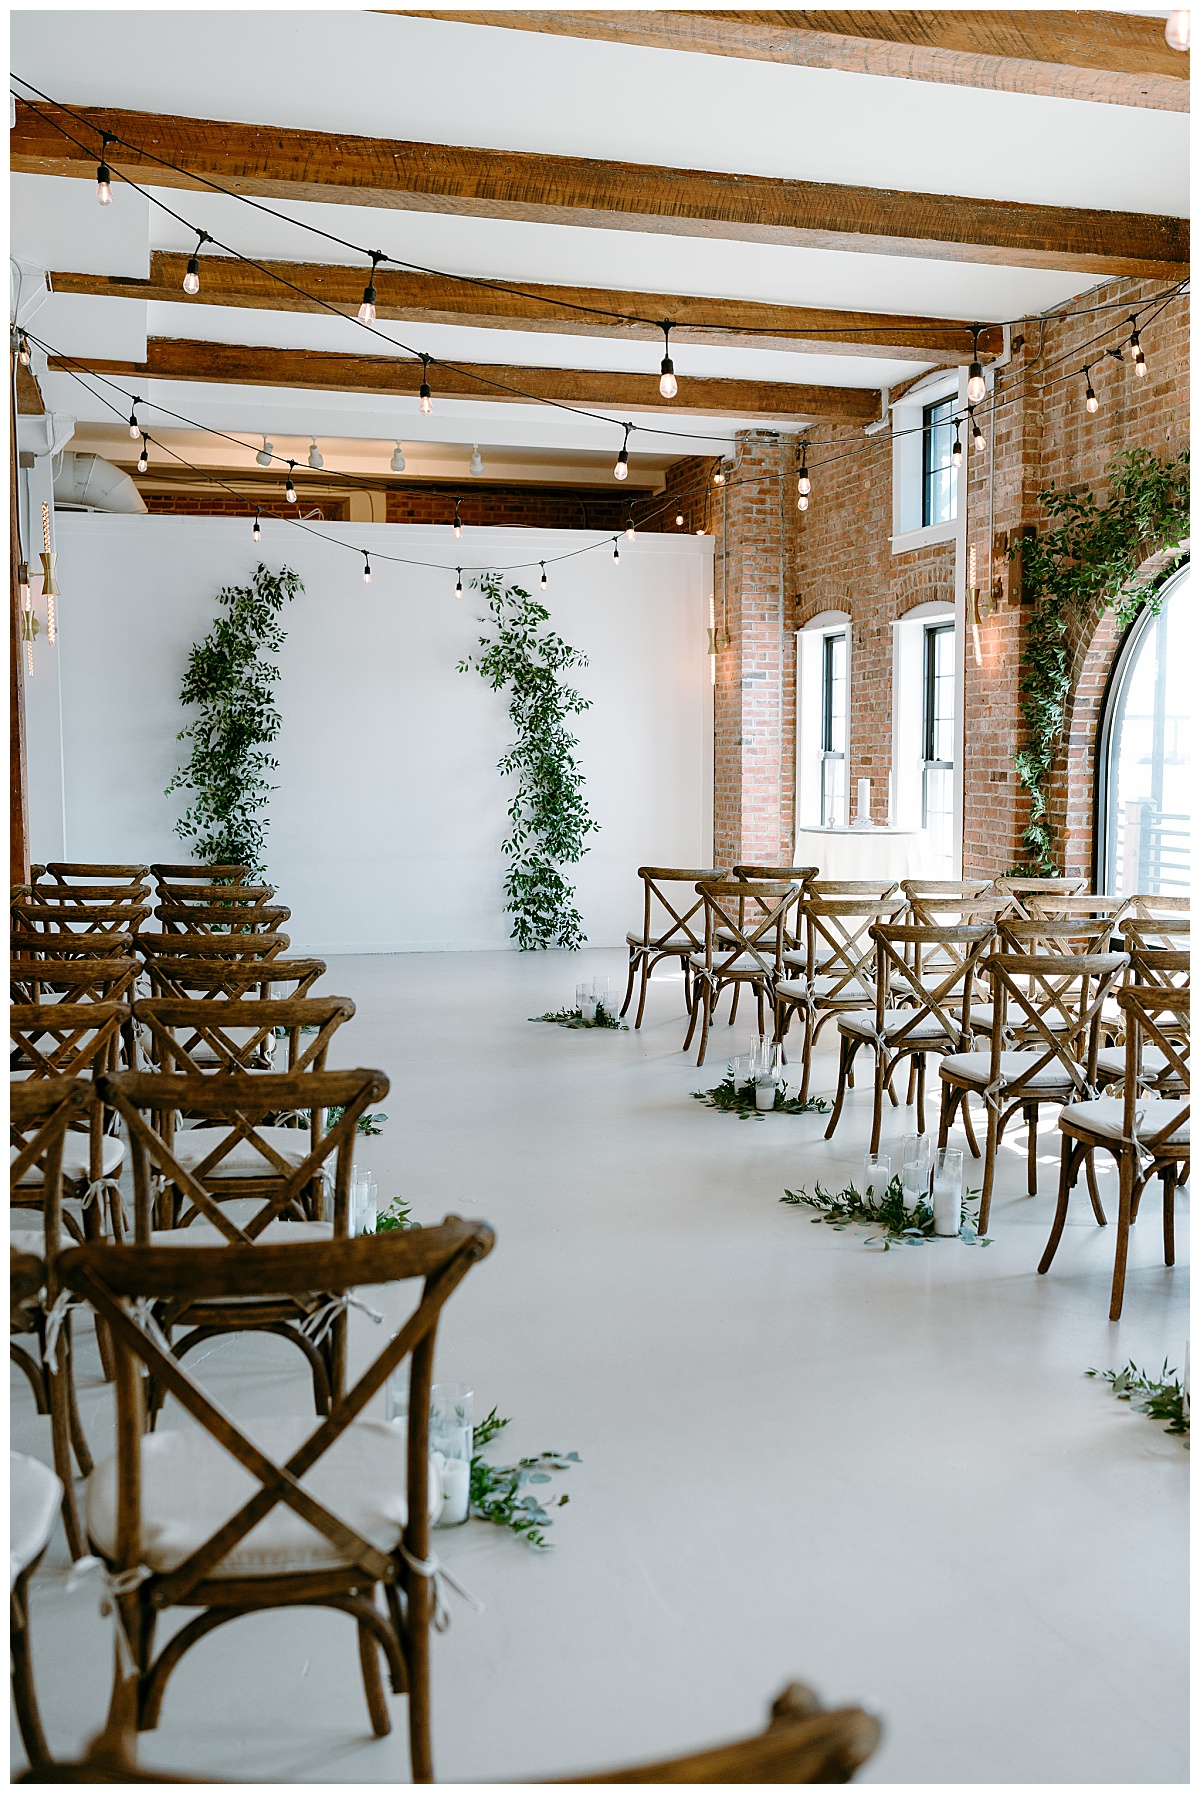 ceremony space is decorated with greenery arch and candles by The Hazel Club